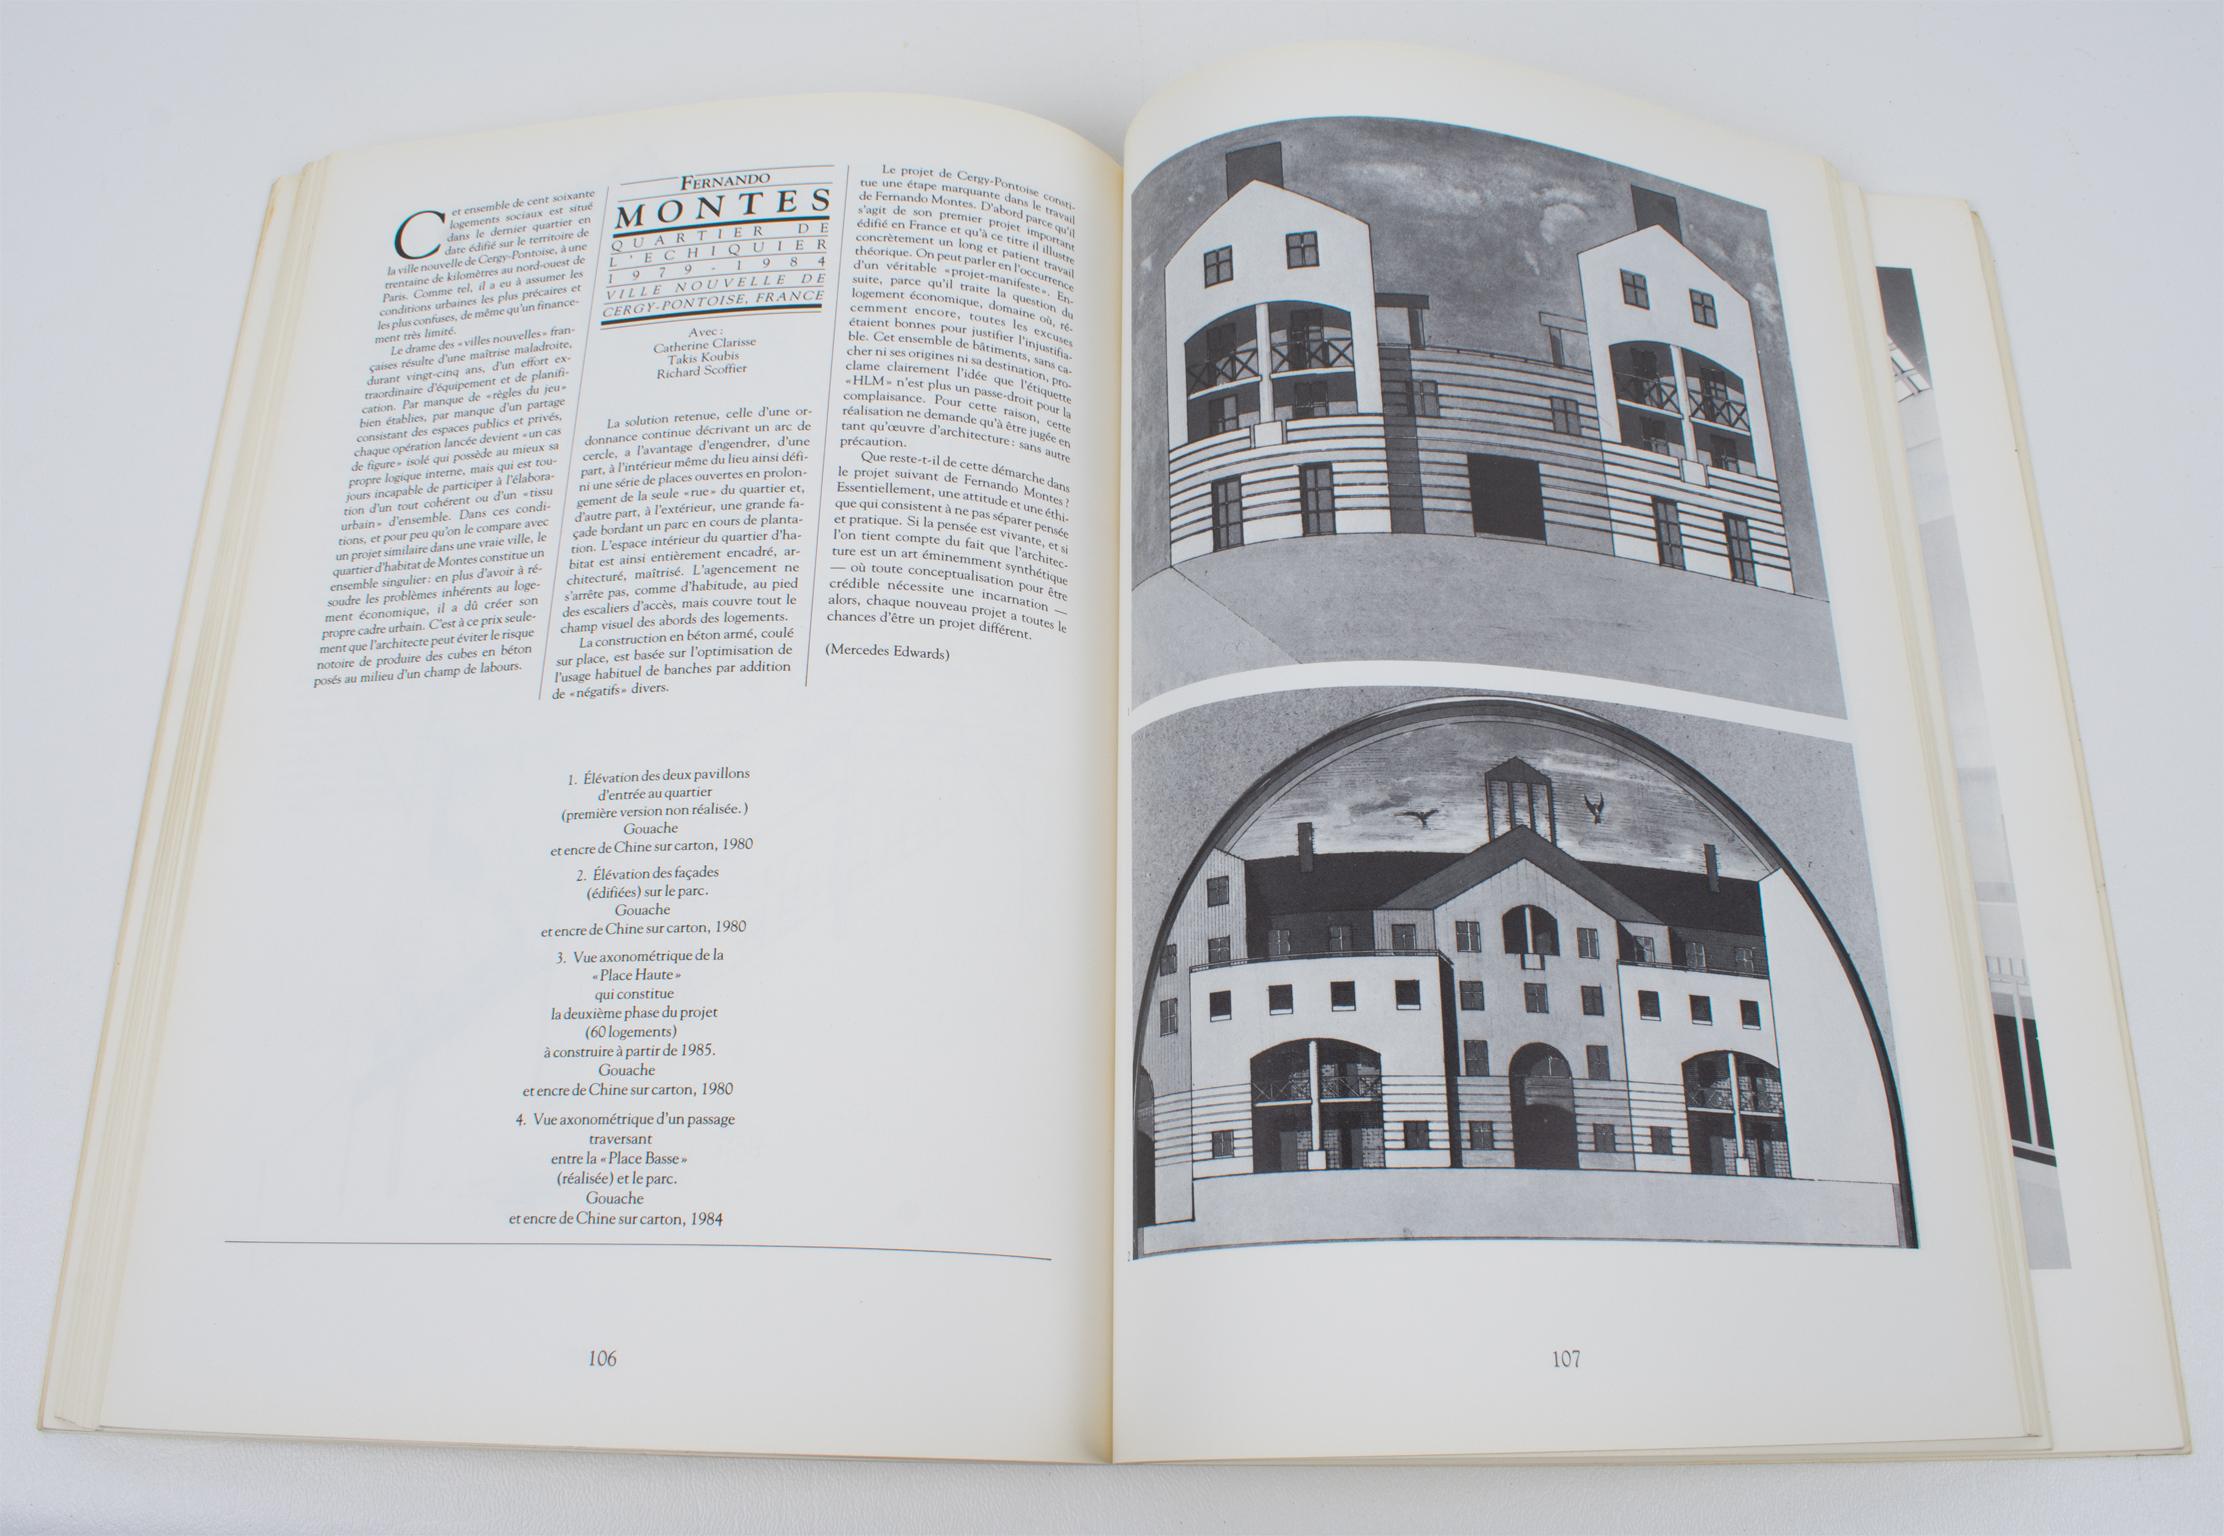 New Architectural Pleasures, French Book by George Pompidou Art Center, 1985 For Sale 1